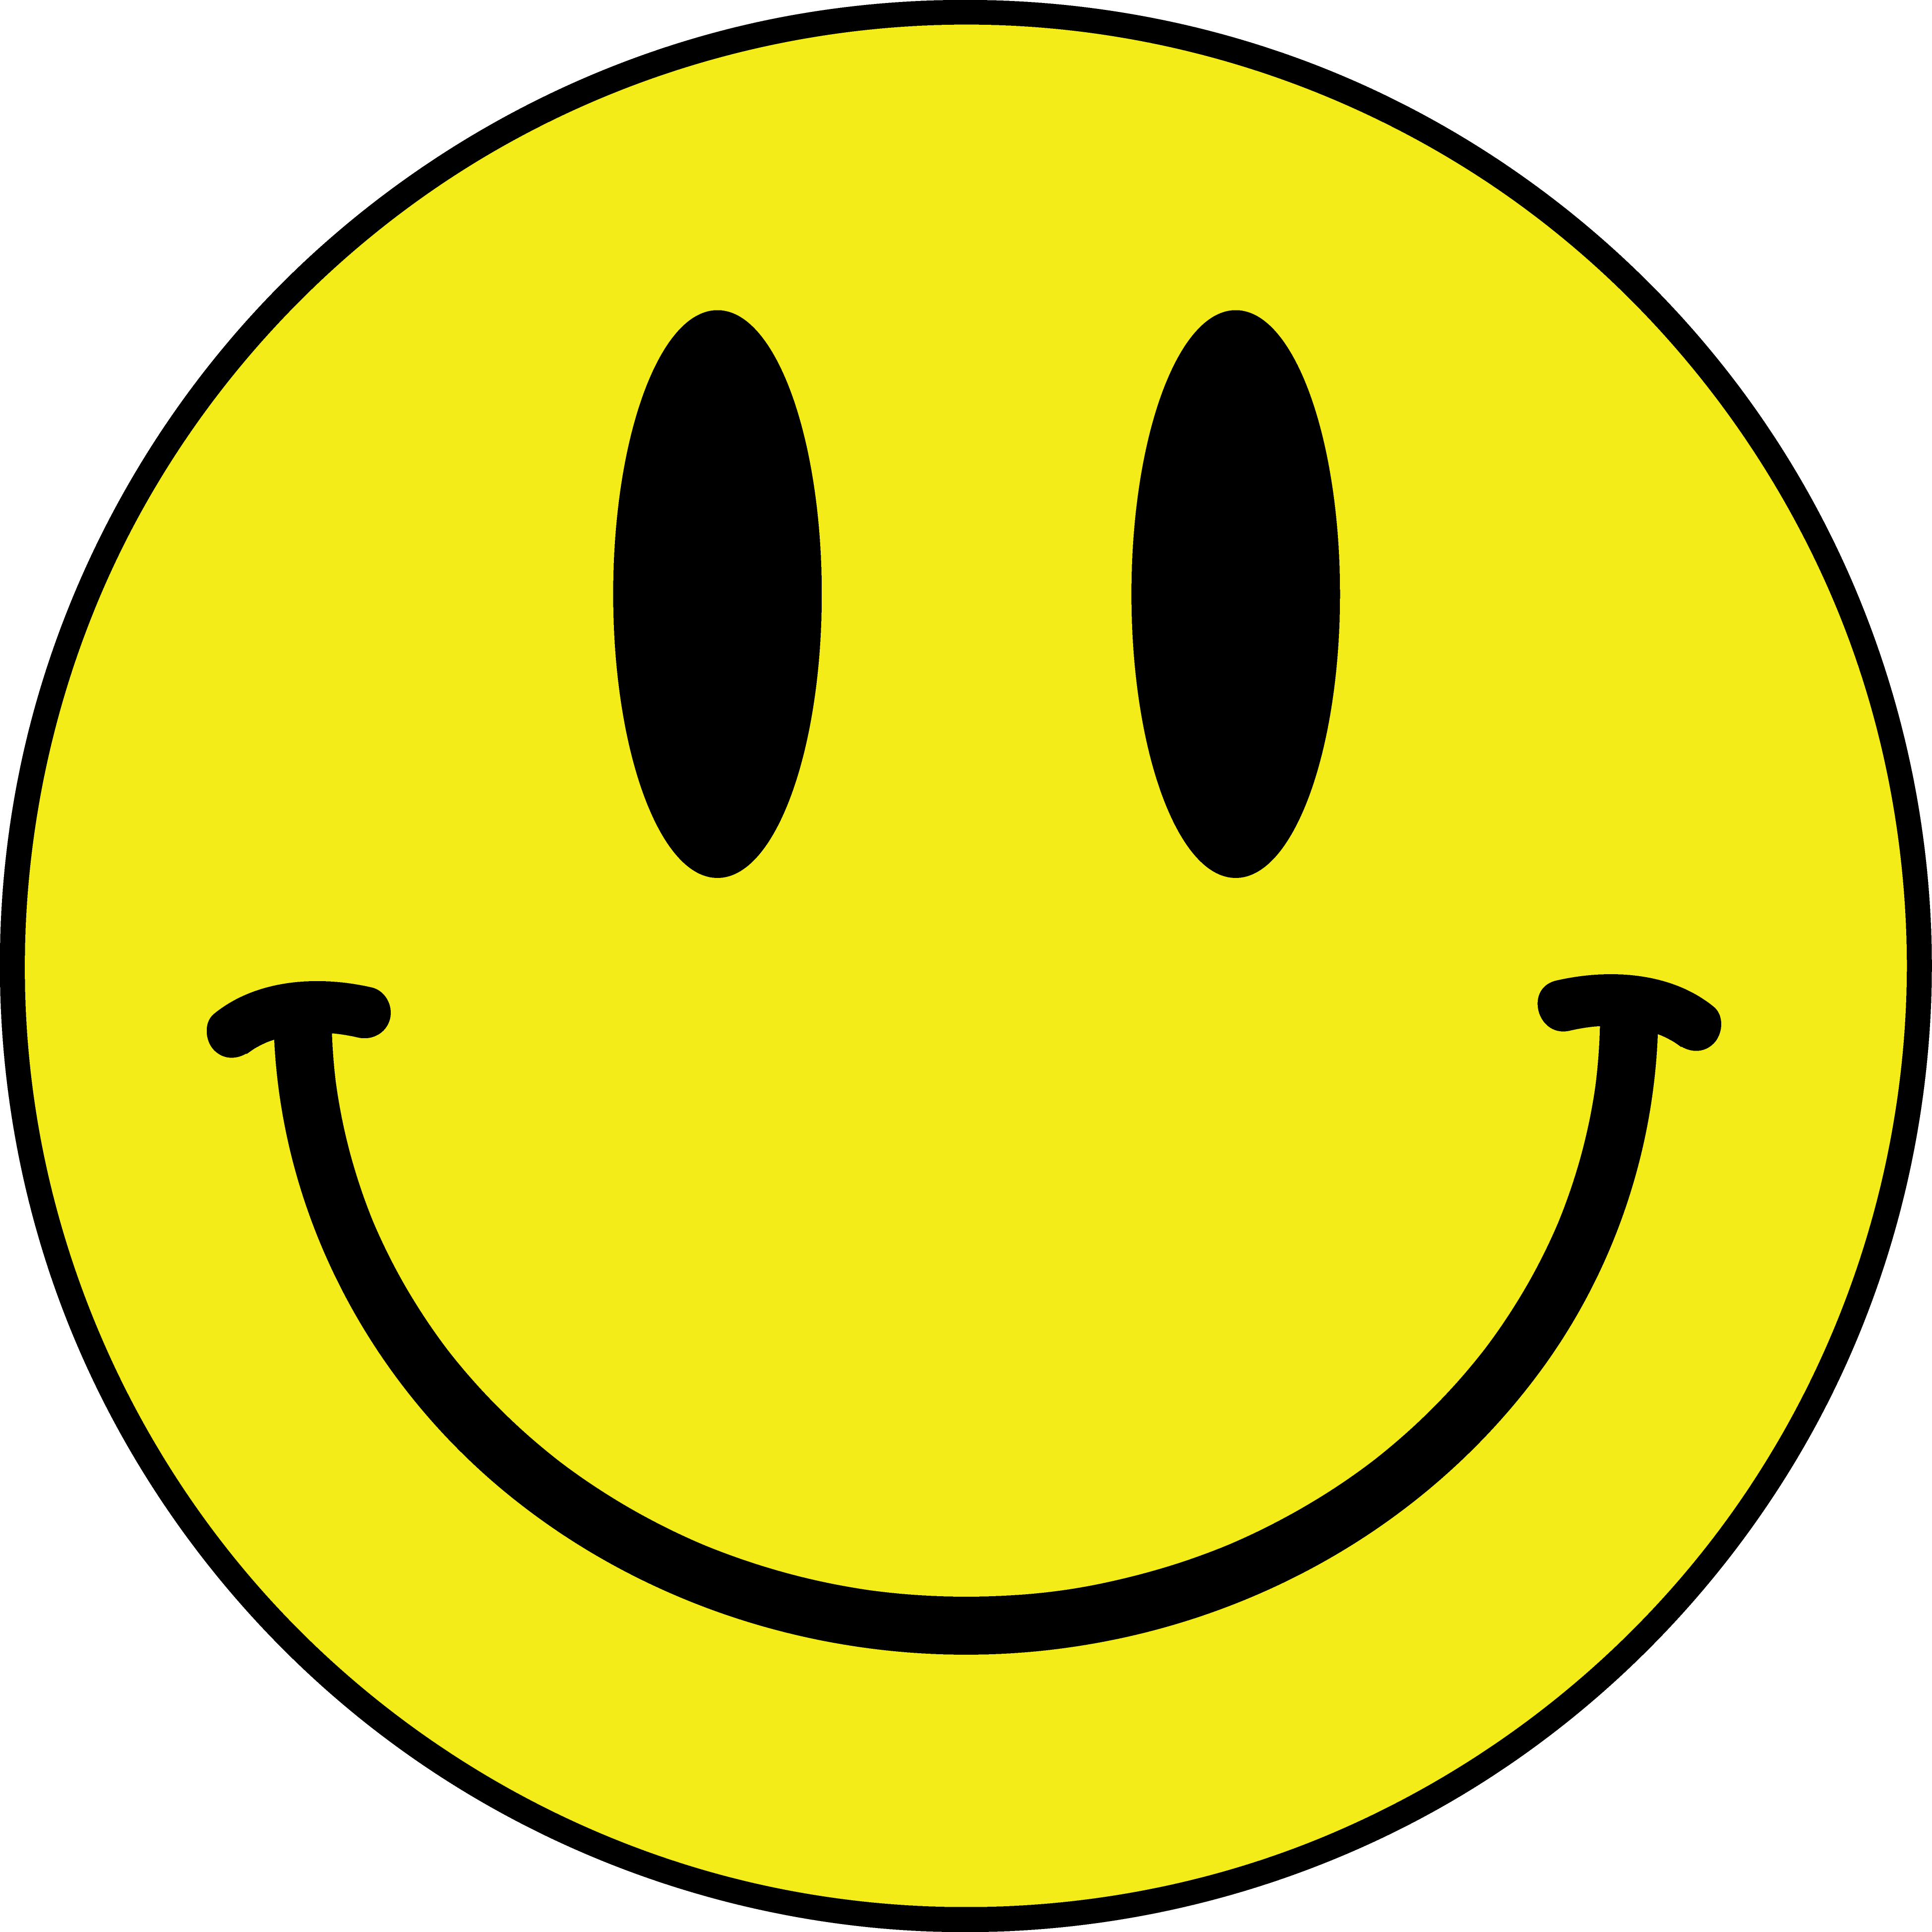 Emoticon,Black,Smiley,Yellow,Face,Smile,White,Facial expression,Green,Head,Eye,Line,Nose,Happy,Cheek,Organ,Mouth,Circle,Icon,Pleased,Symbol,No expression,Laugh,Sticker,Illustration